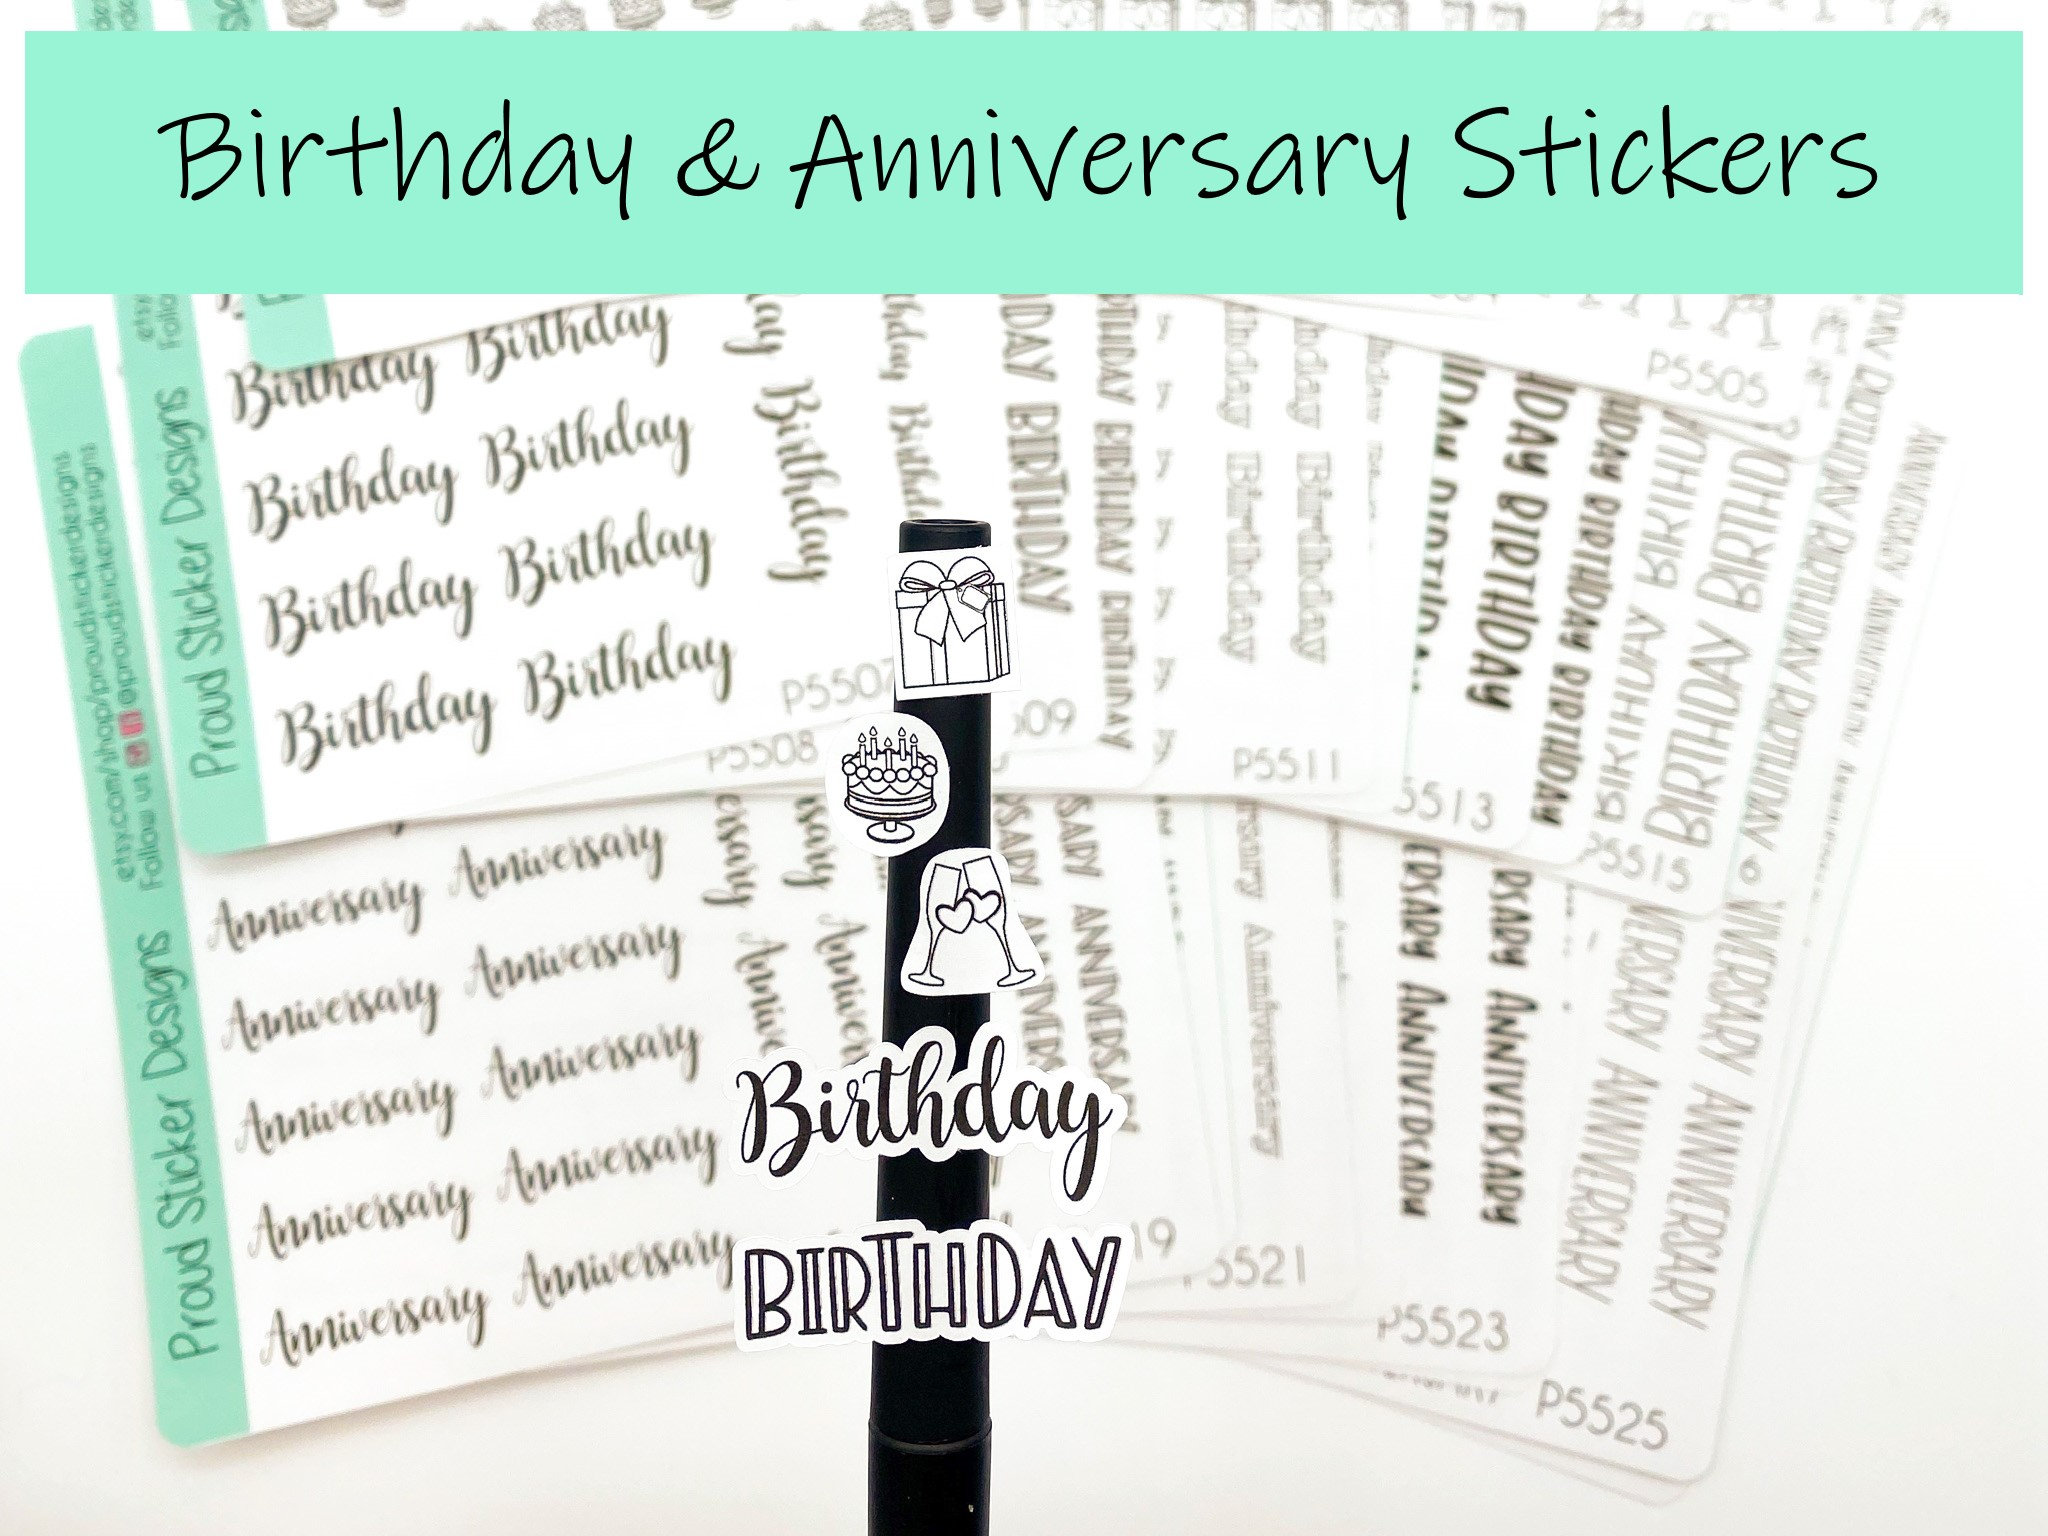 BIRTHDAY Page Flag Stickers, Stickers for Birthday Reminders, Calendar –  The Planning Queen